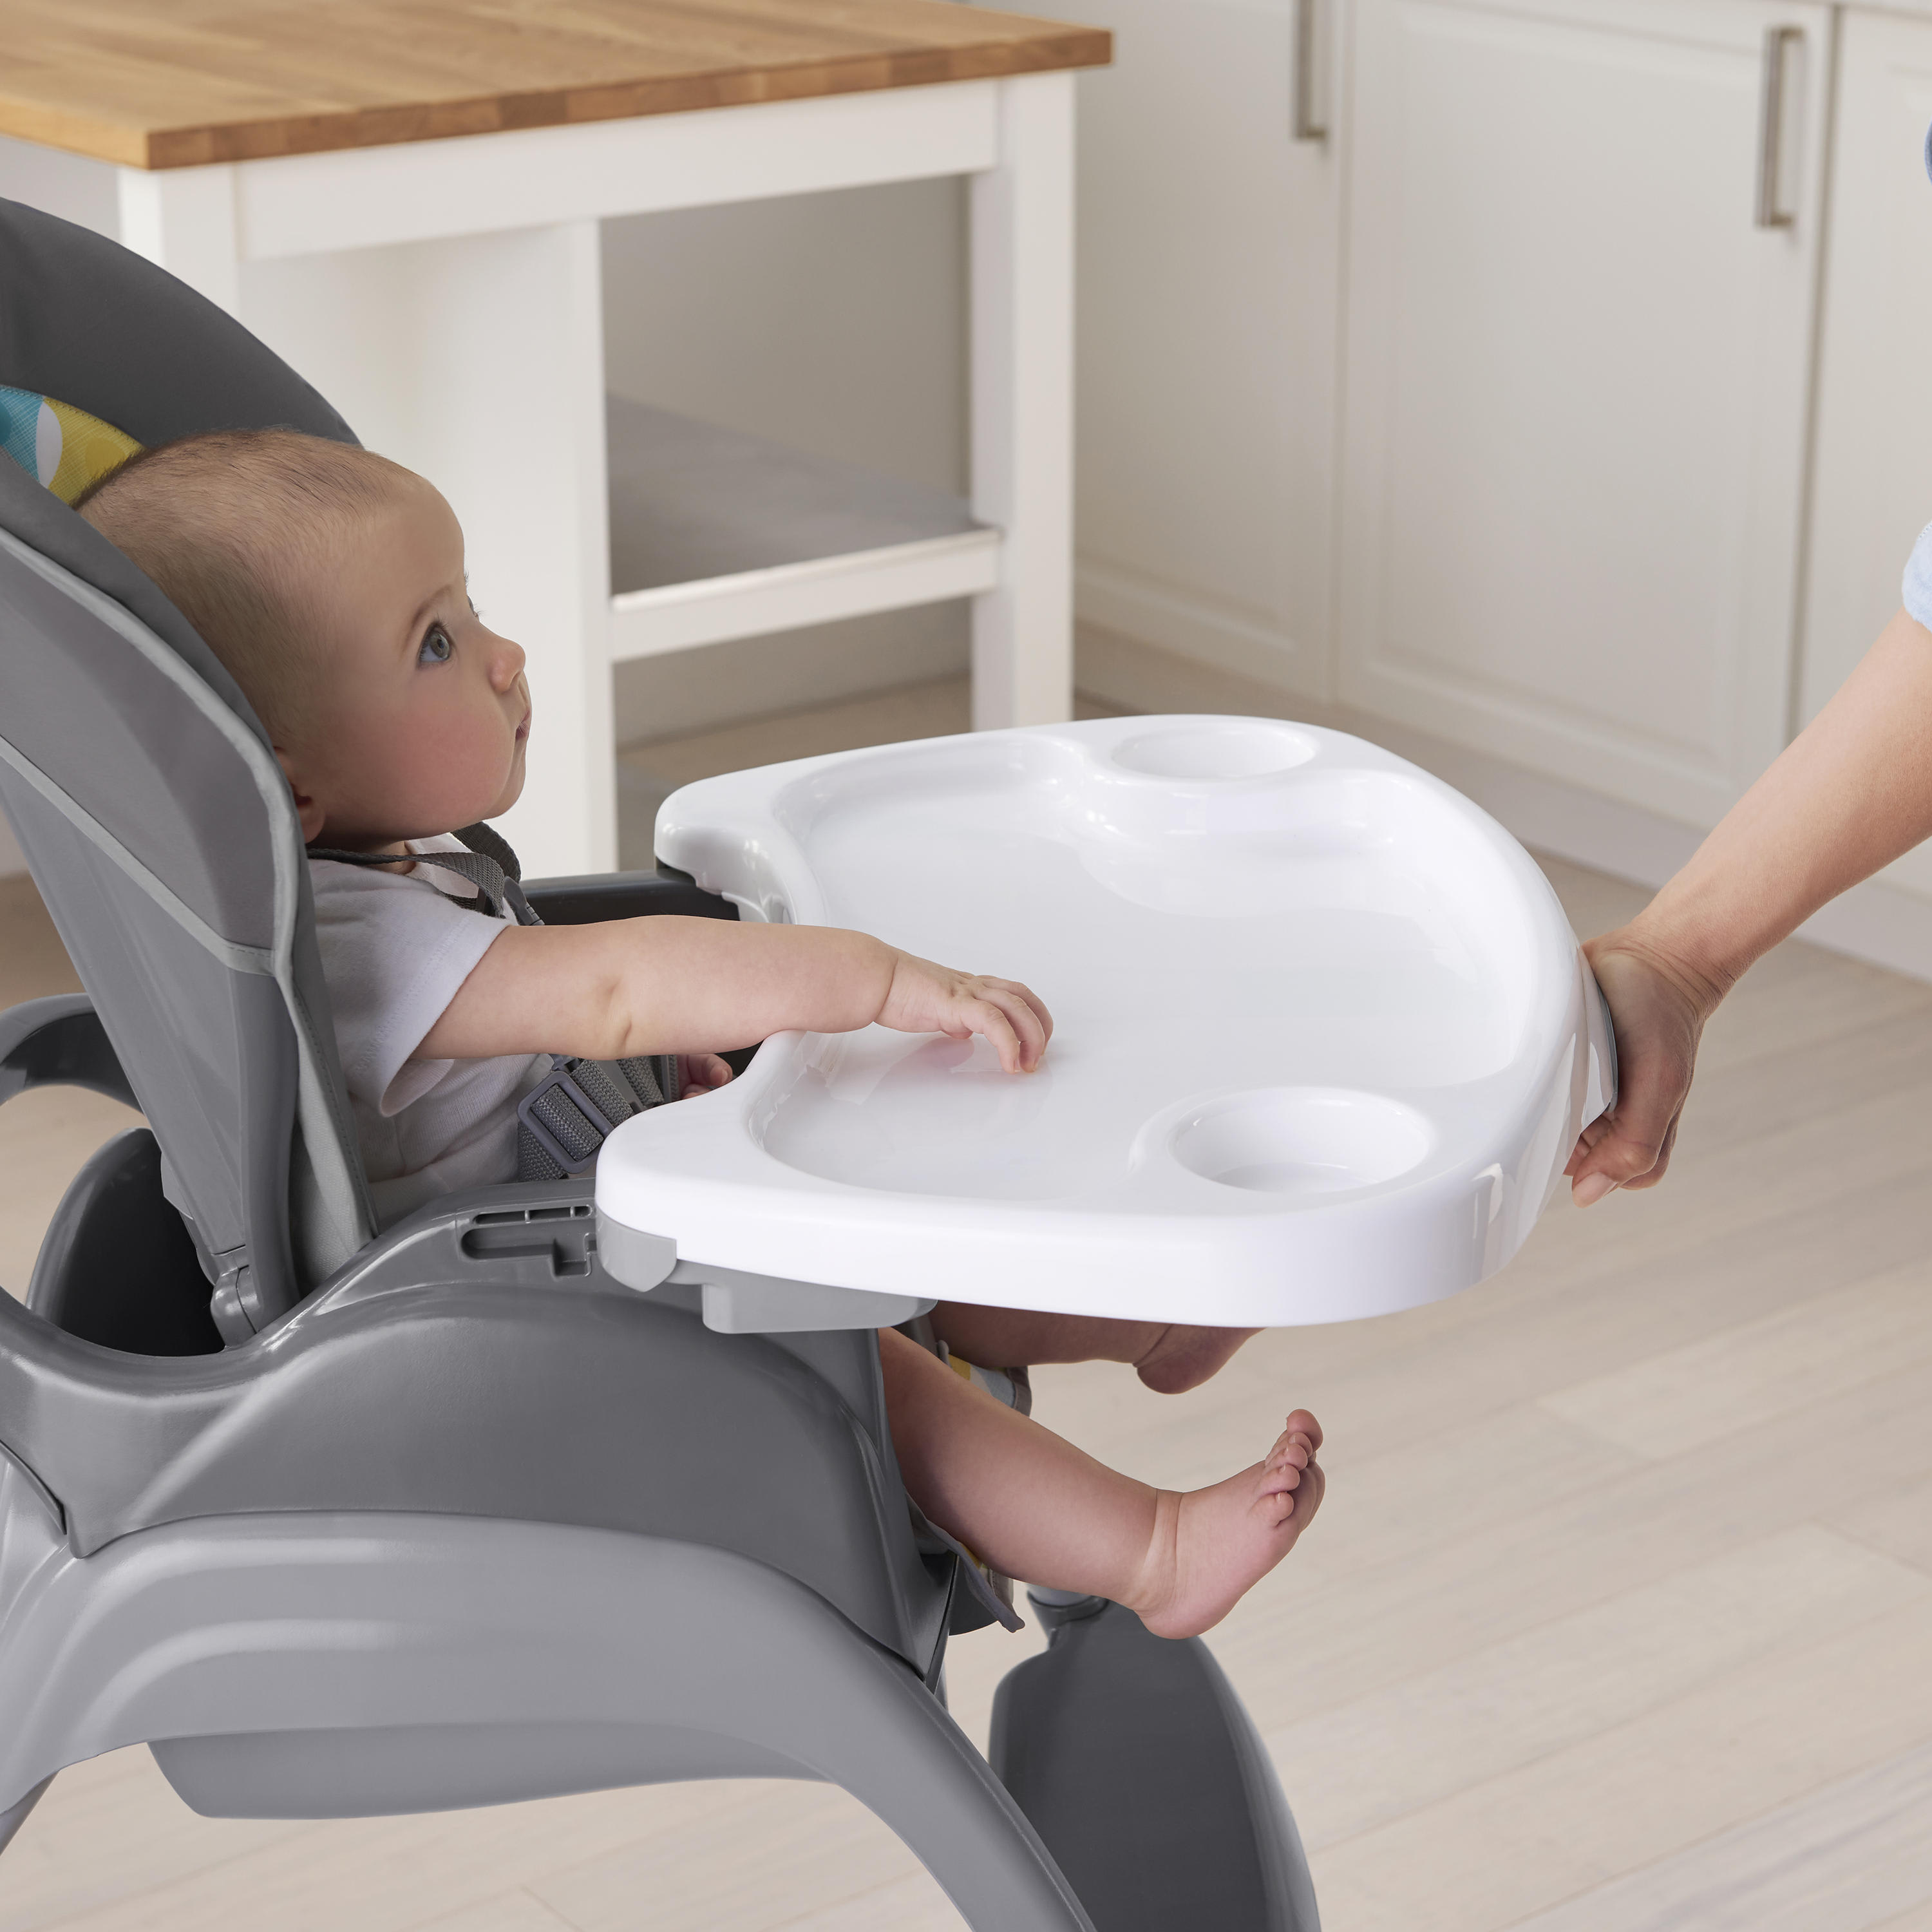 Ingenuity Trio 3-in-1 High Chair - Moreland - image 3 of 12